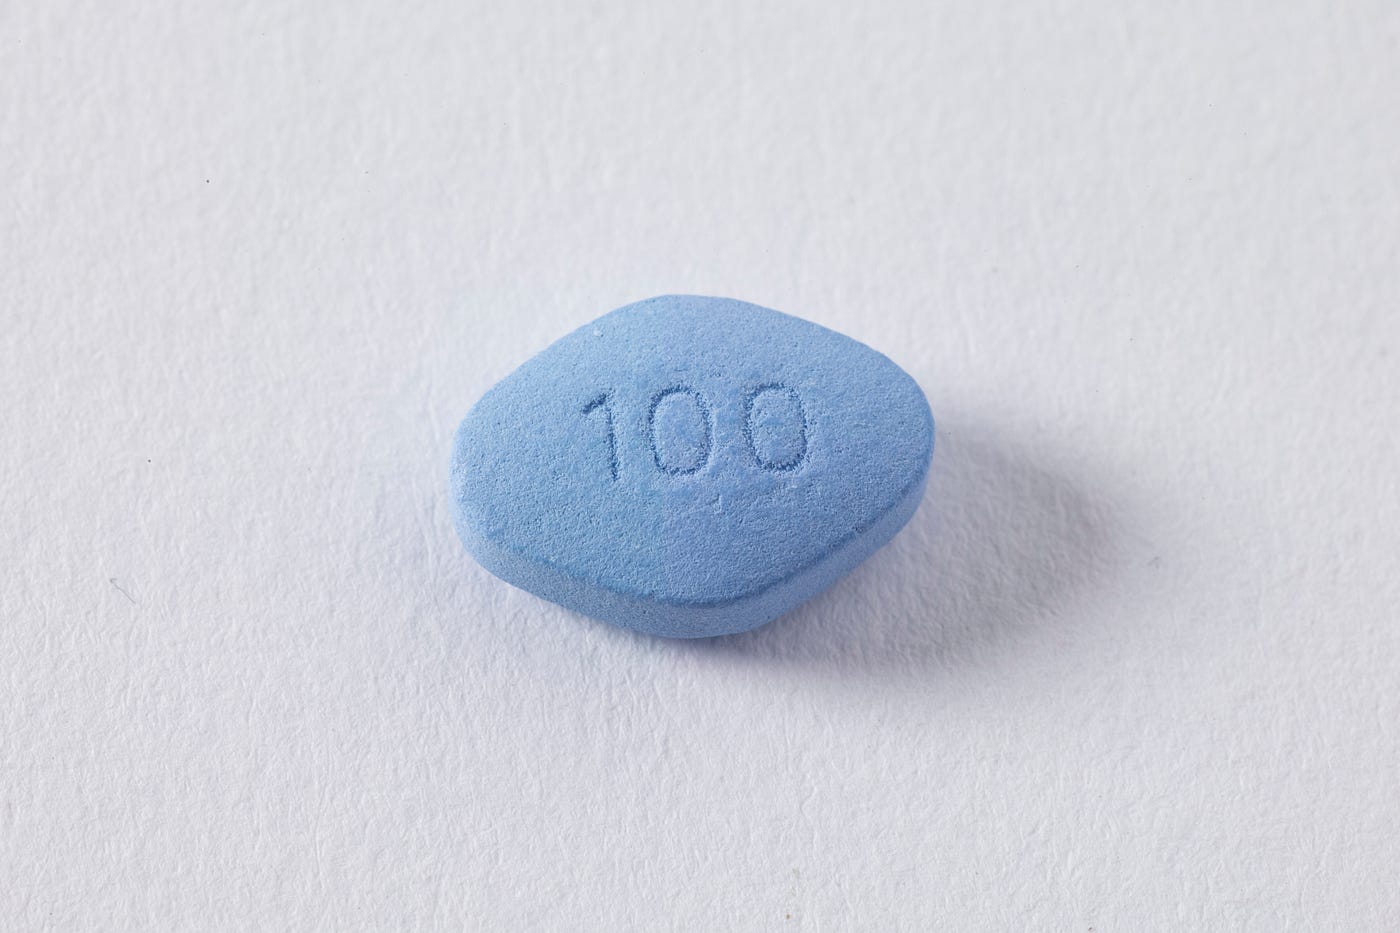 What Happened When I Tried Viagra? by Carlyn Beccia Fearless She Wrote Medium